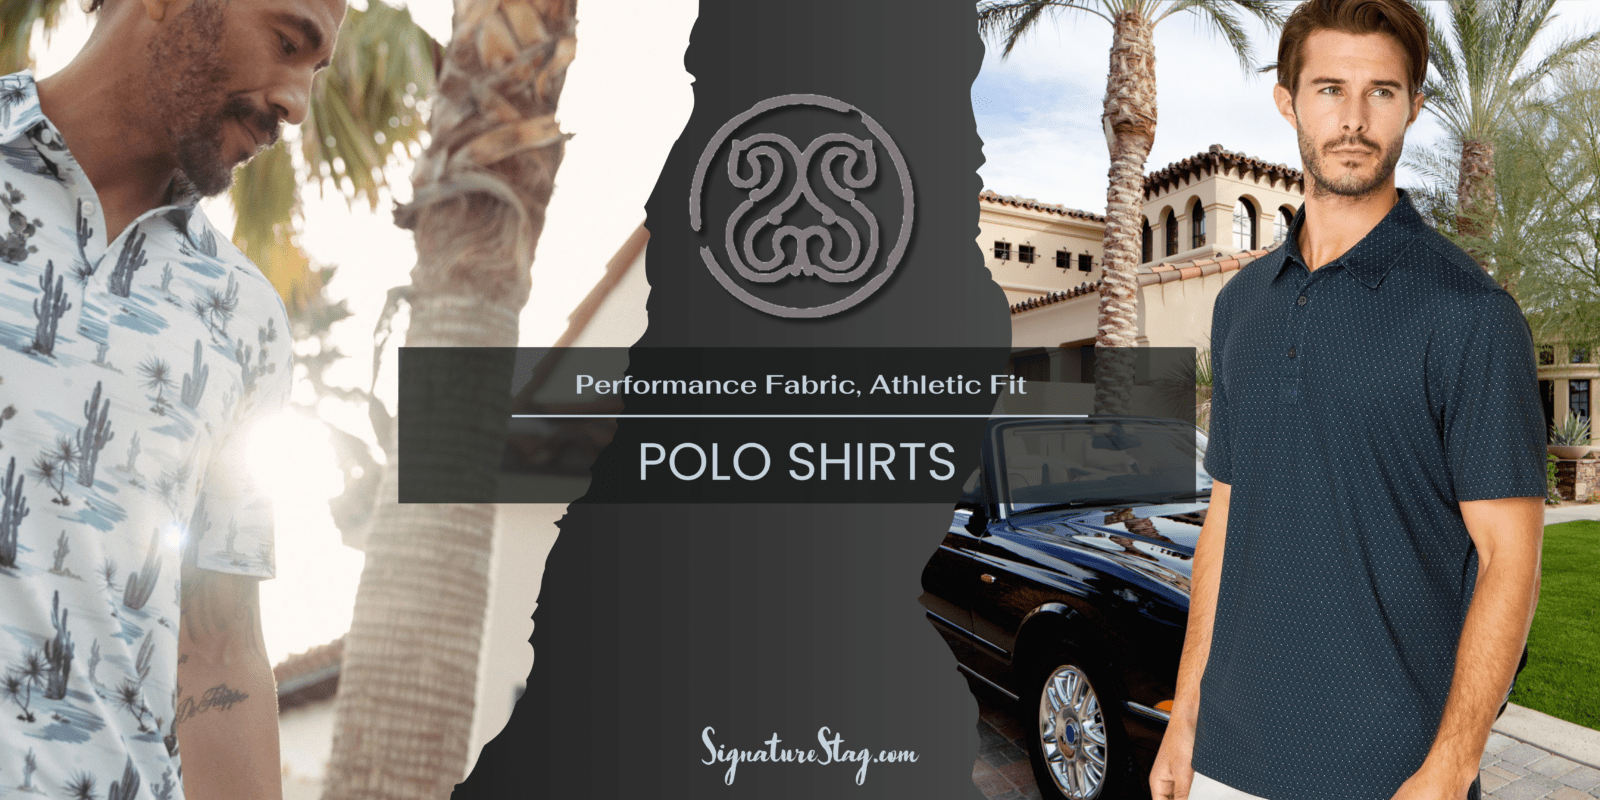 Polo shirts in Lubbock TX and Midland TX. Large selection of performance polo and collegiate Texas Tech polo and apparel.